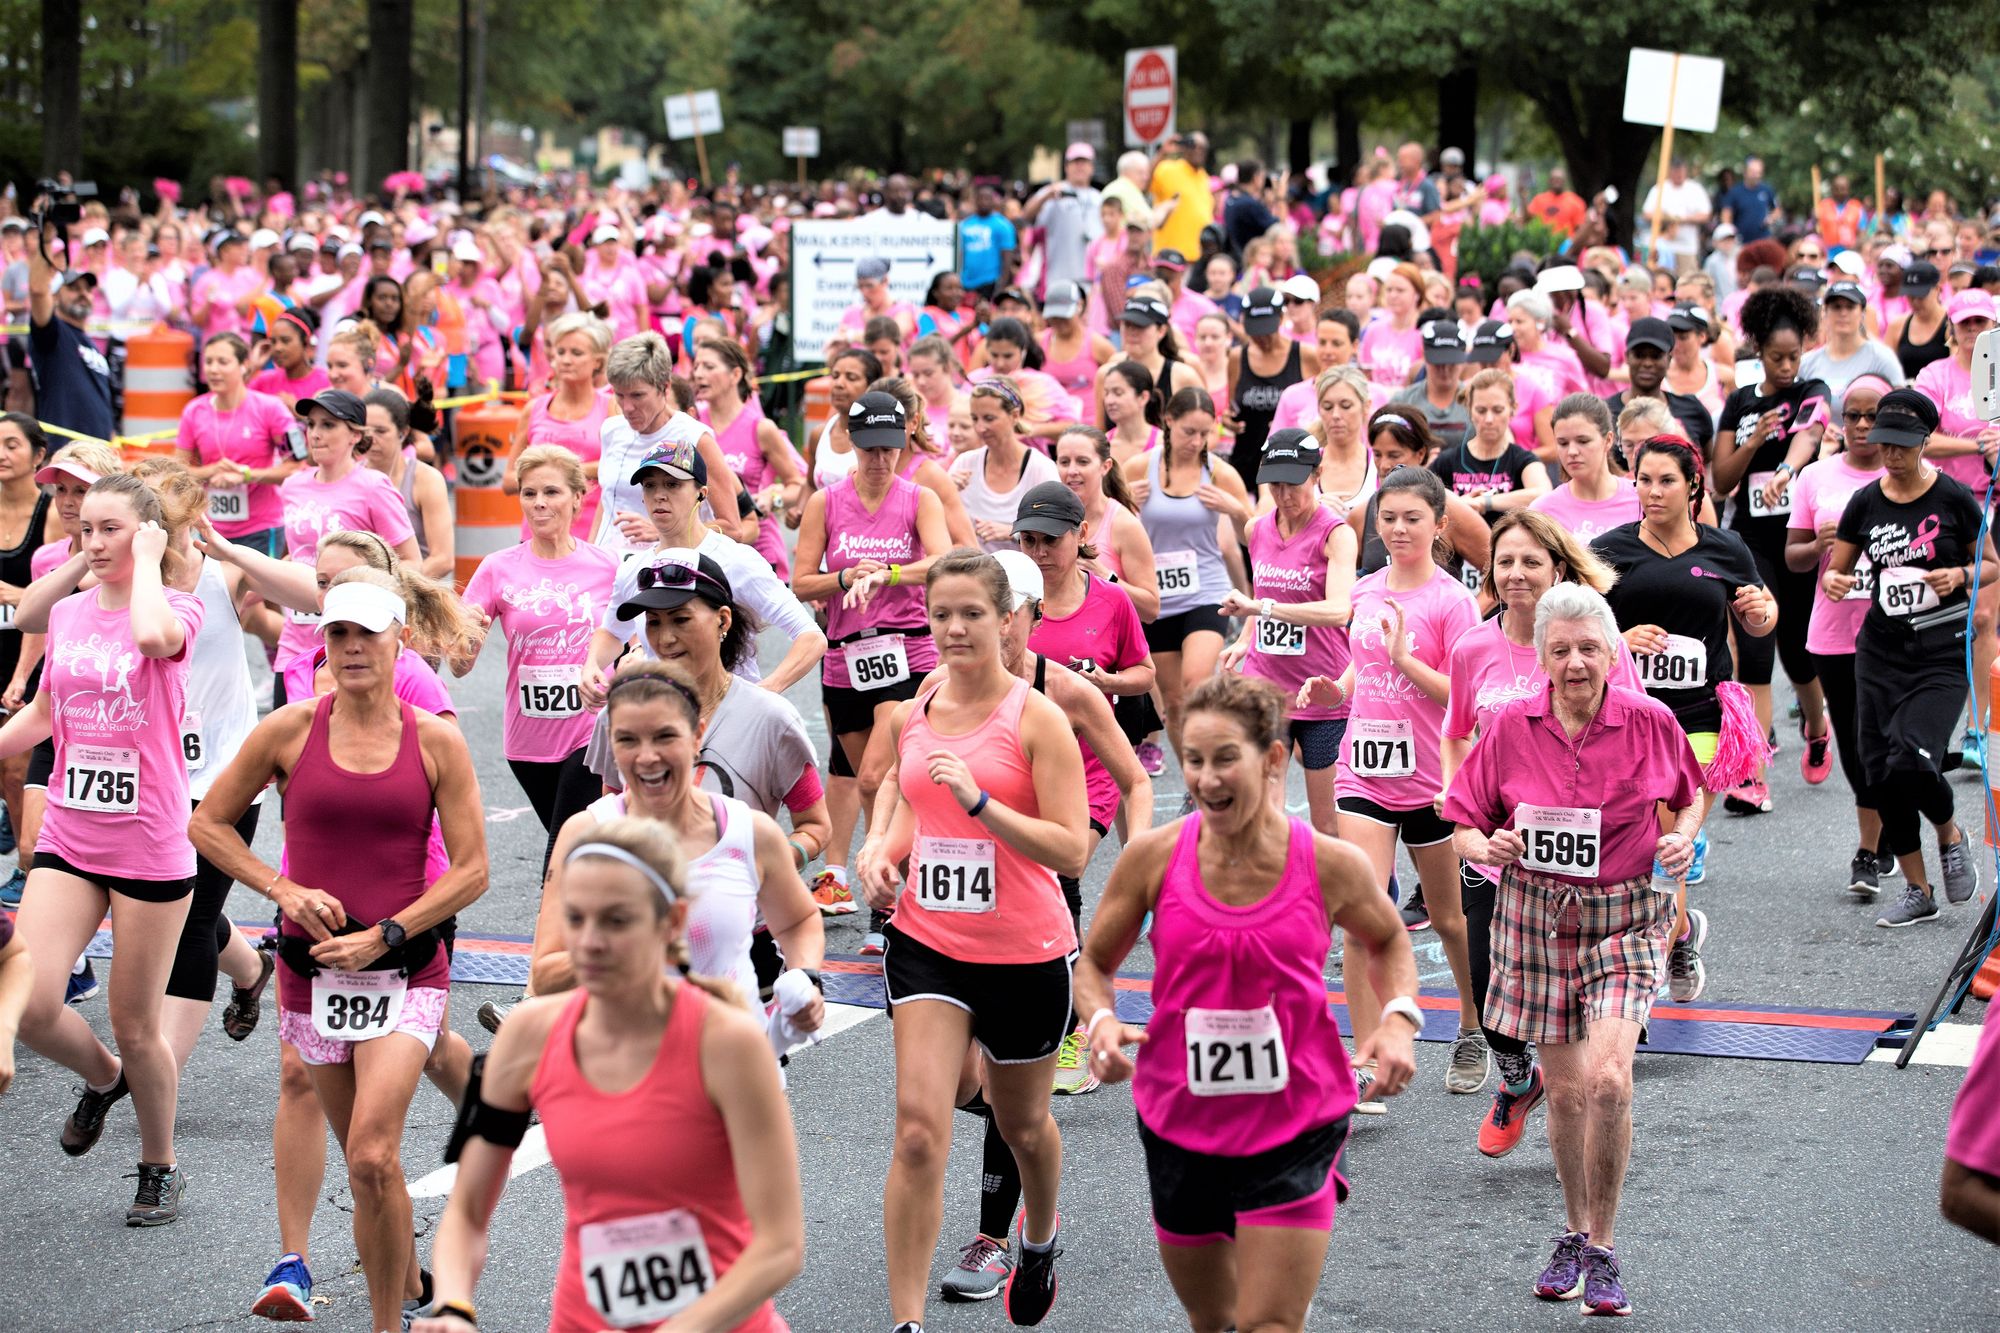 Women's Only 5K: The loss of a race 'in the community, for the community'